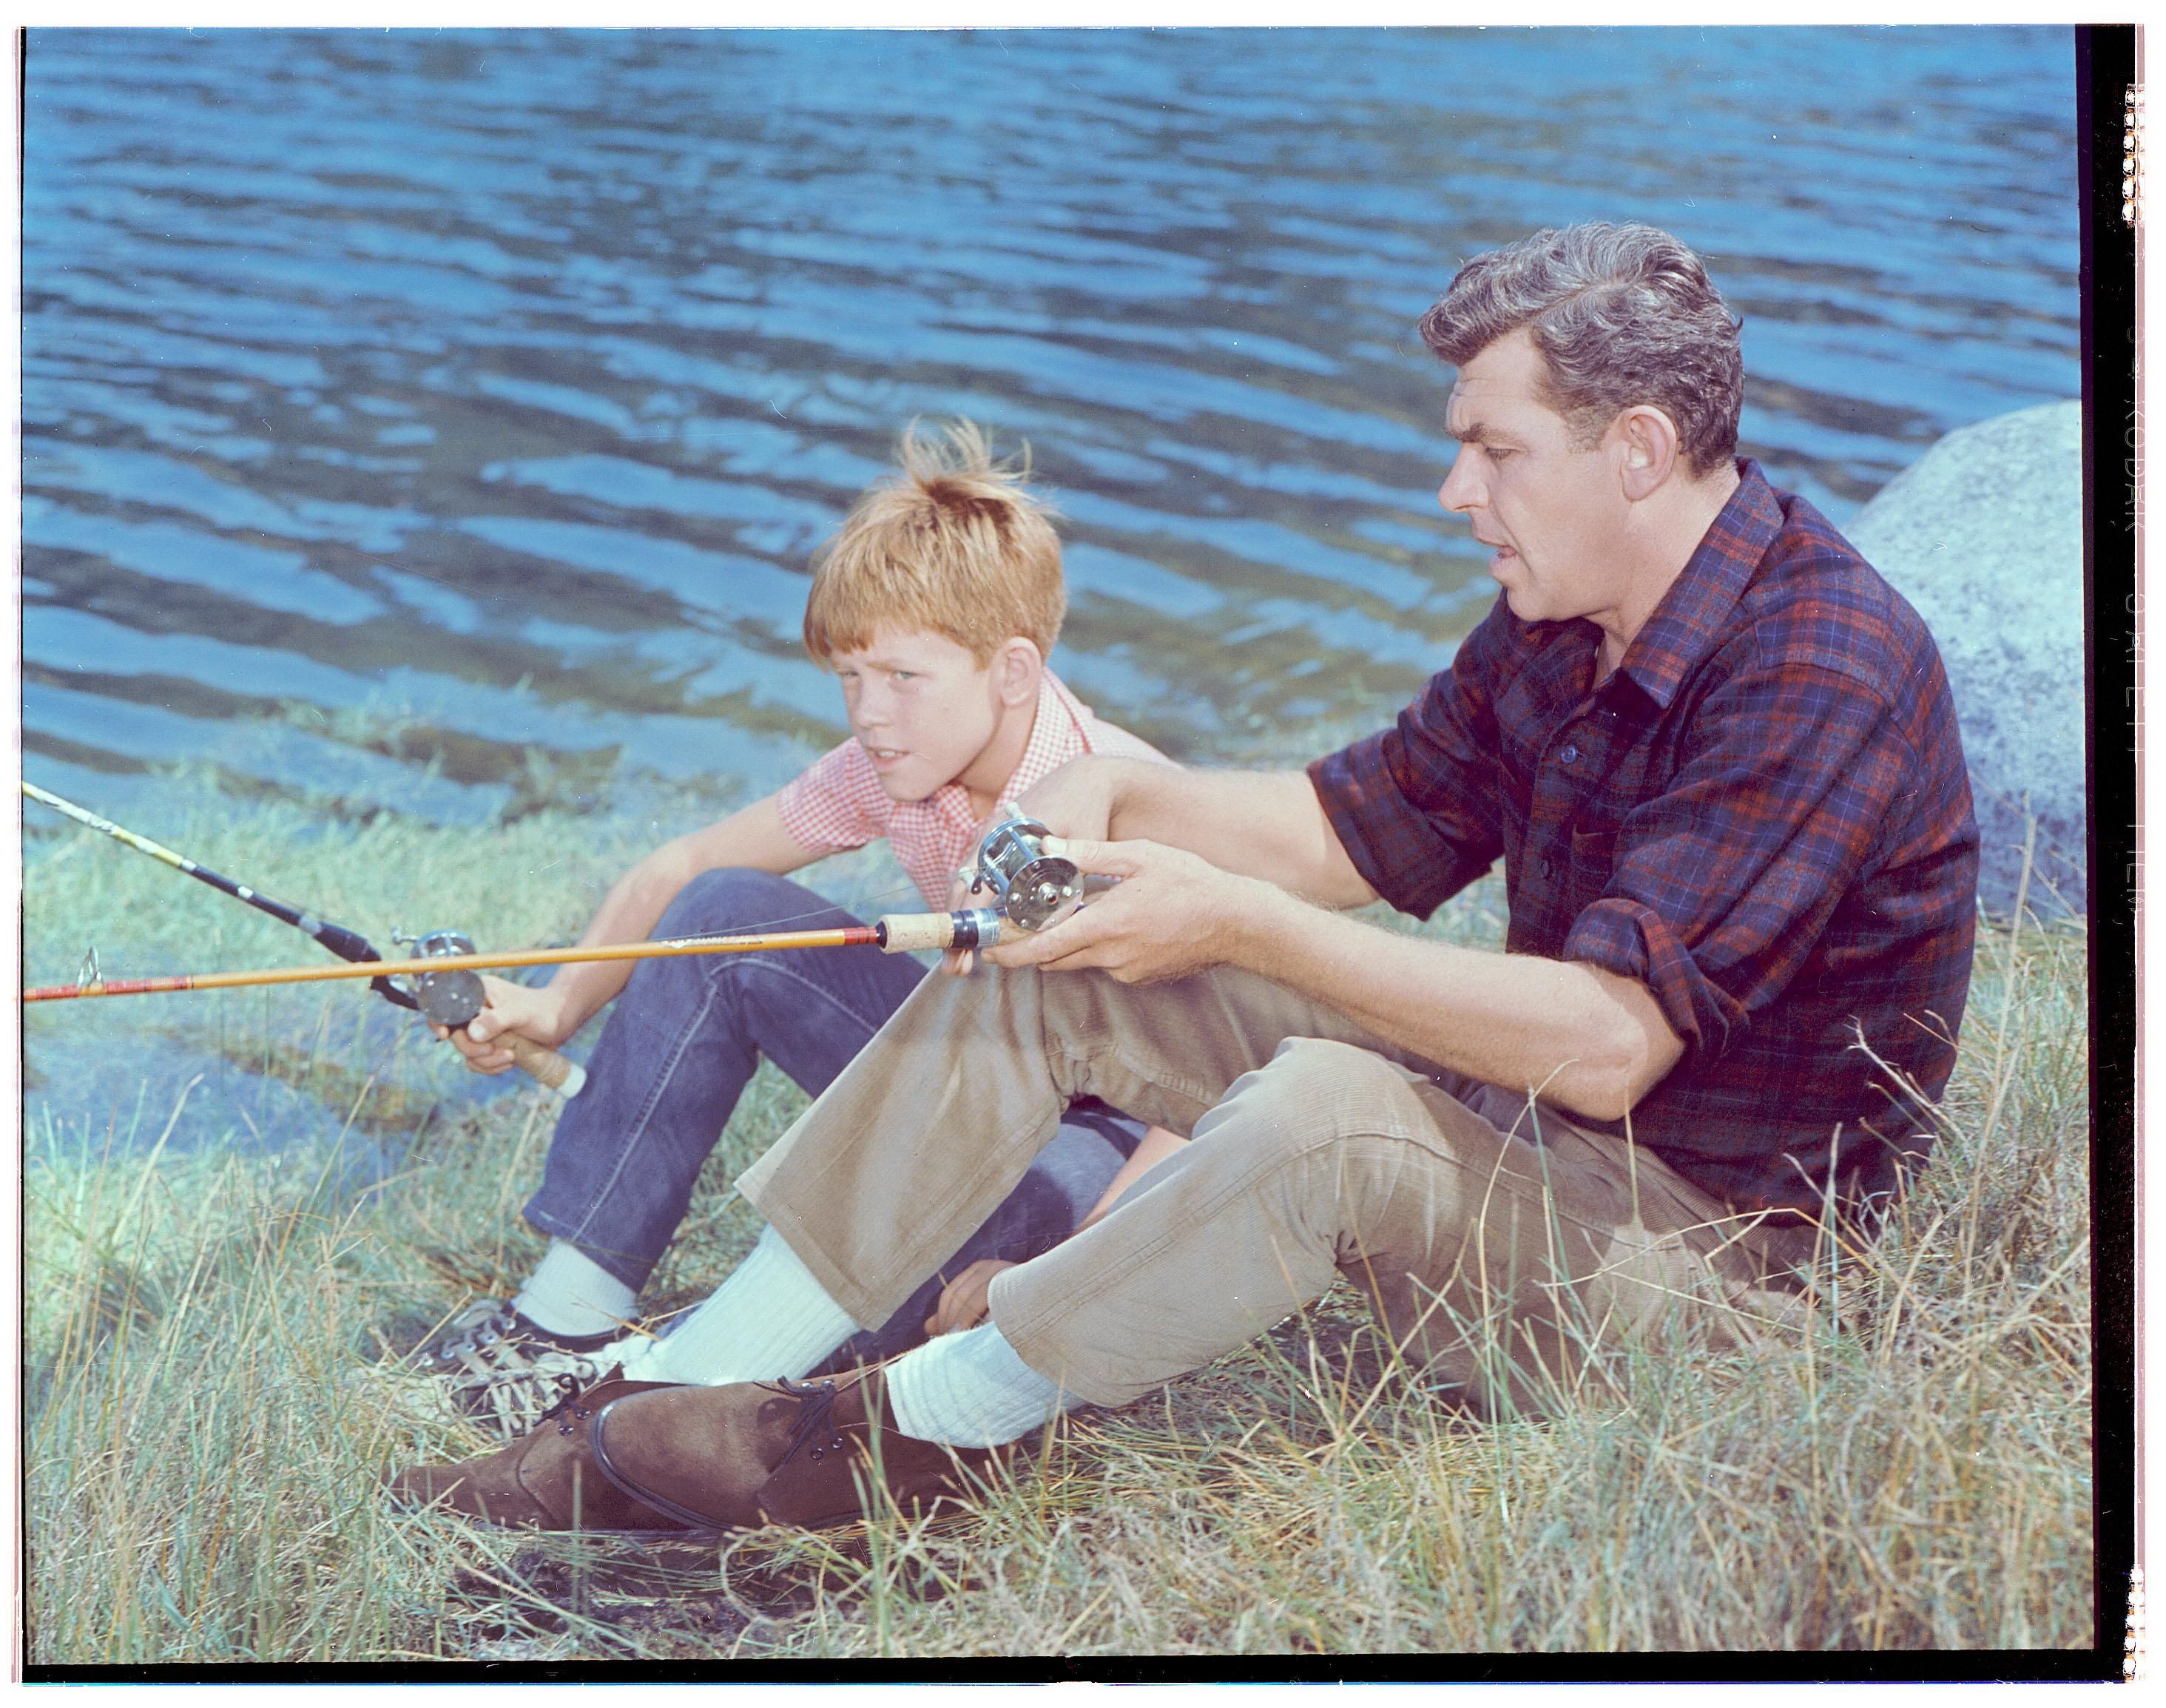 Andy Griffith and Ron Howard sit on the edge of a lake with their fishing gear in a scene from The Andy Griffith Show.